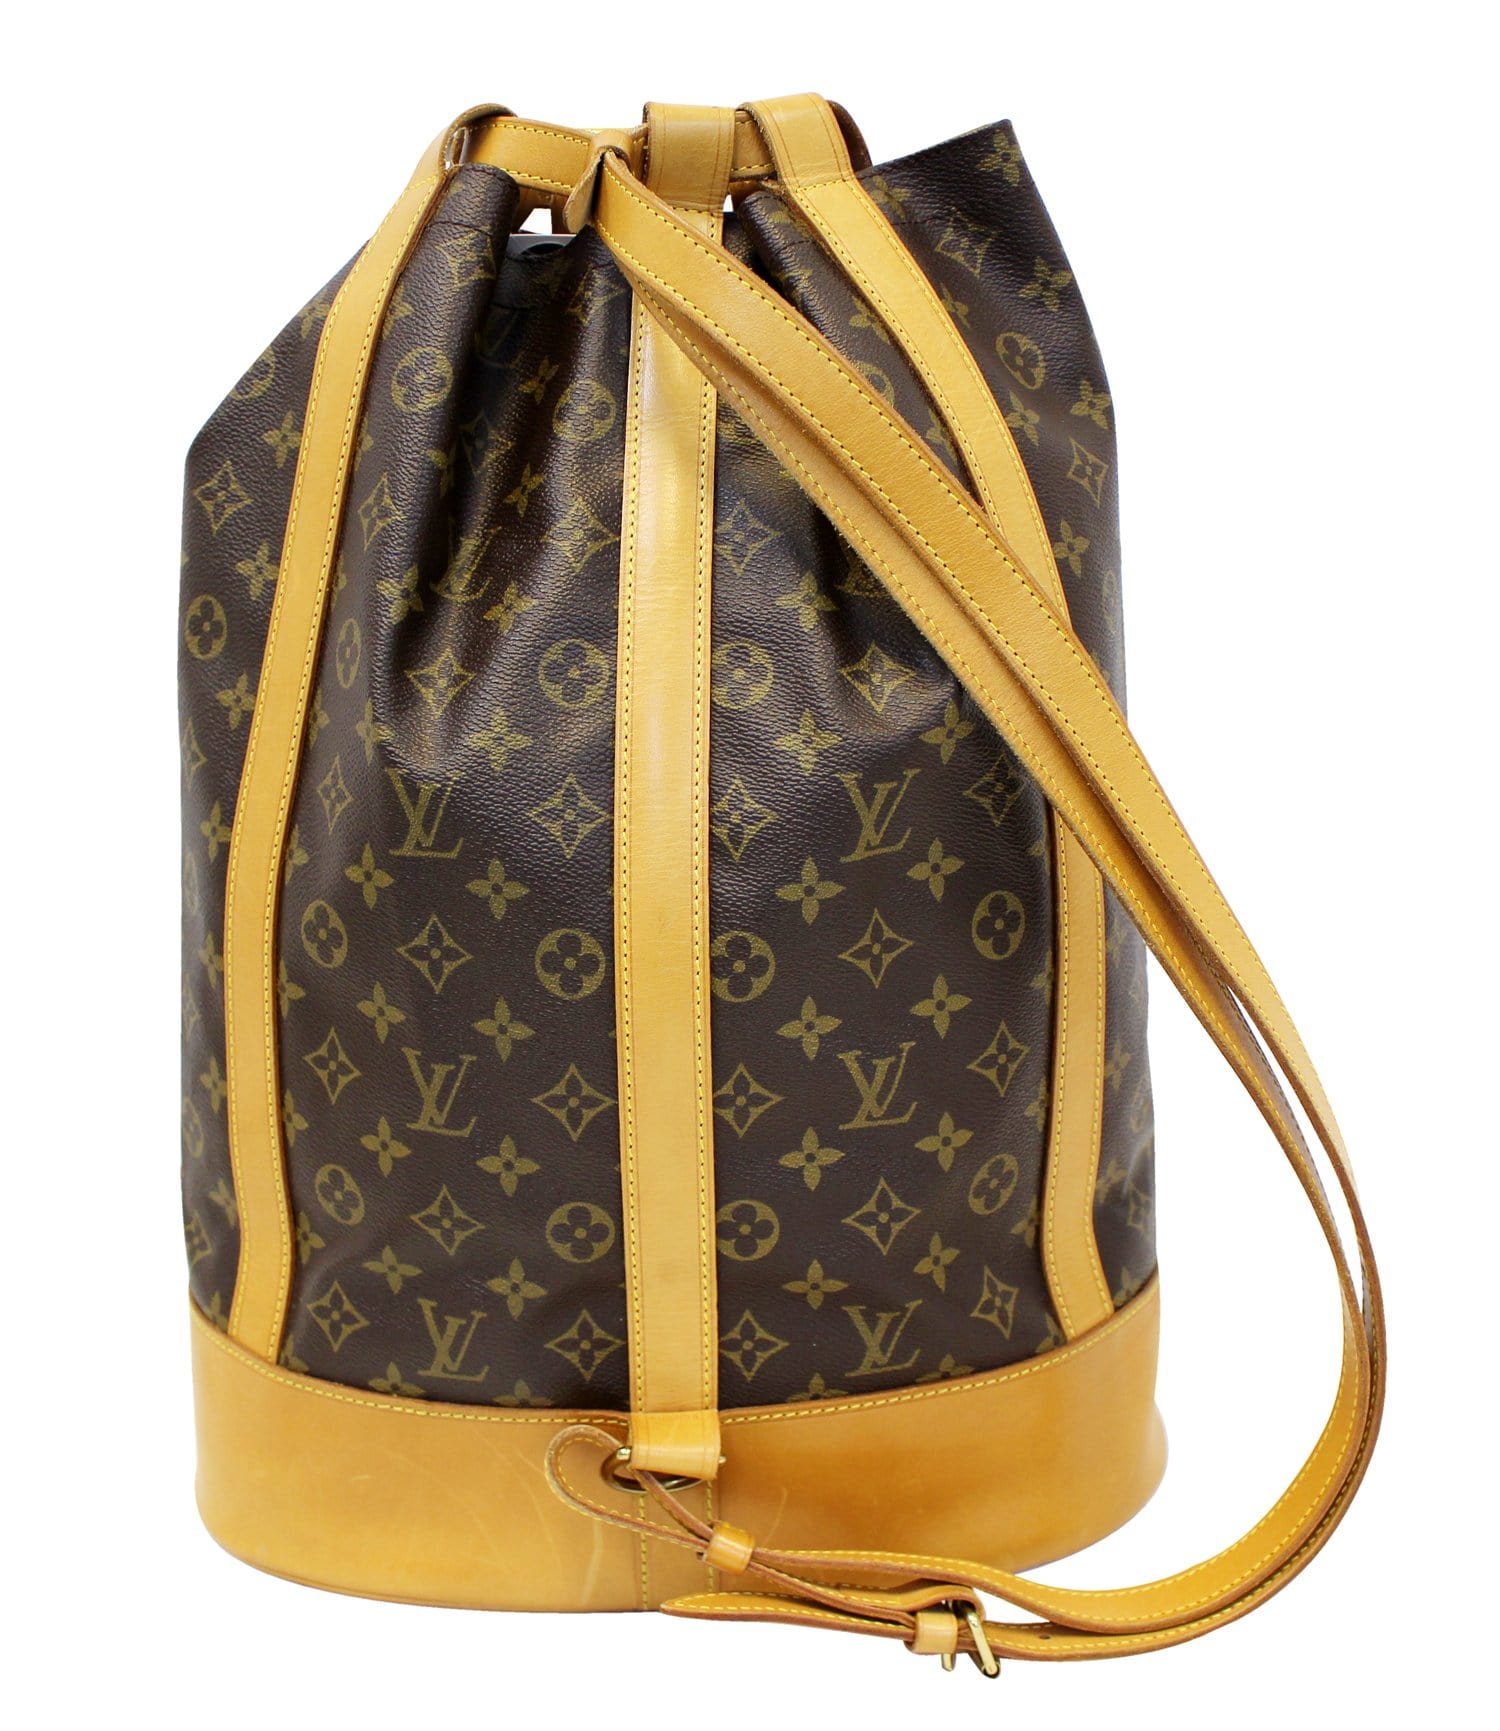 Louis Vuitton Backpack Gold Plate - For Sale on 1stDibs  louis vuitton  backpack with gold plate on front, gold plate louis vuitton inventpdr  backpack, real louis vuitton backpack gold plate